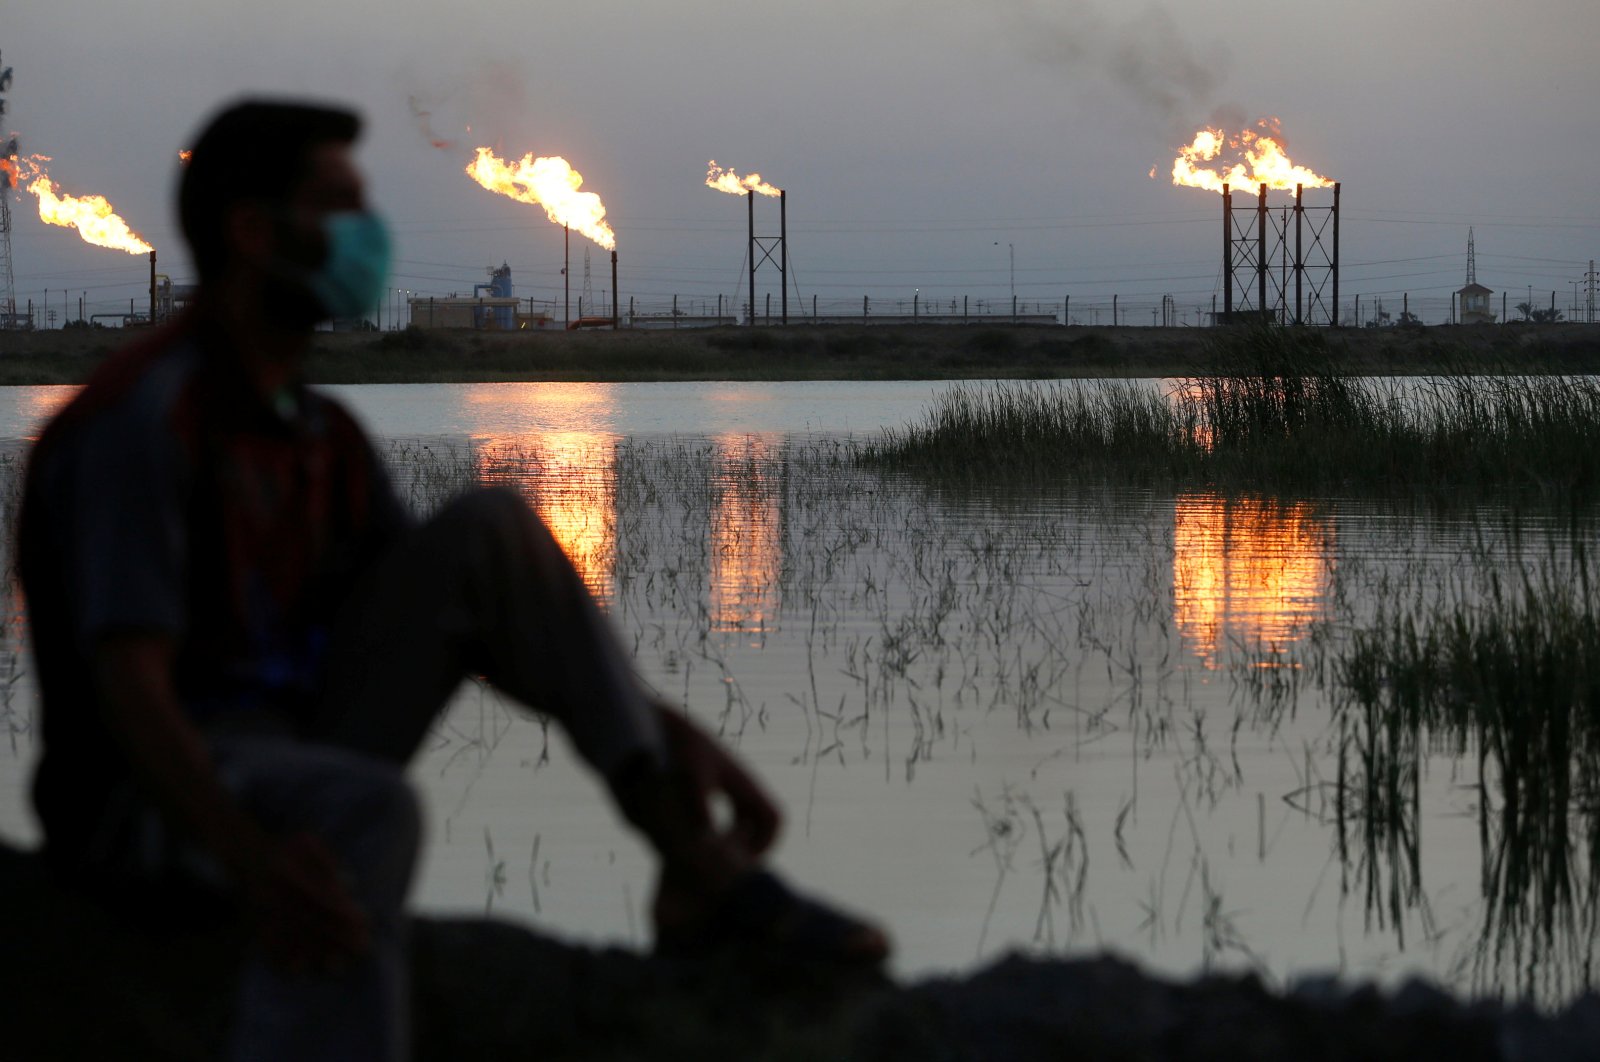 Flames emerge from flare stacks at Nahr Bin Umar oil field, as a man is seen wearing a protective face mask following the outbreak of the coronavirus, north of Basra, Iraq, March 9, 2020. (Reuters Photo)